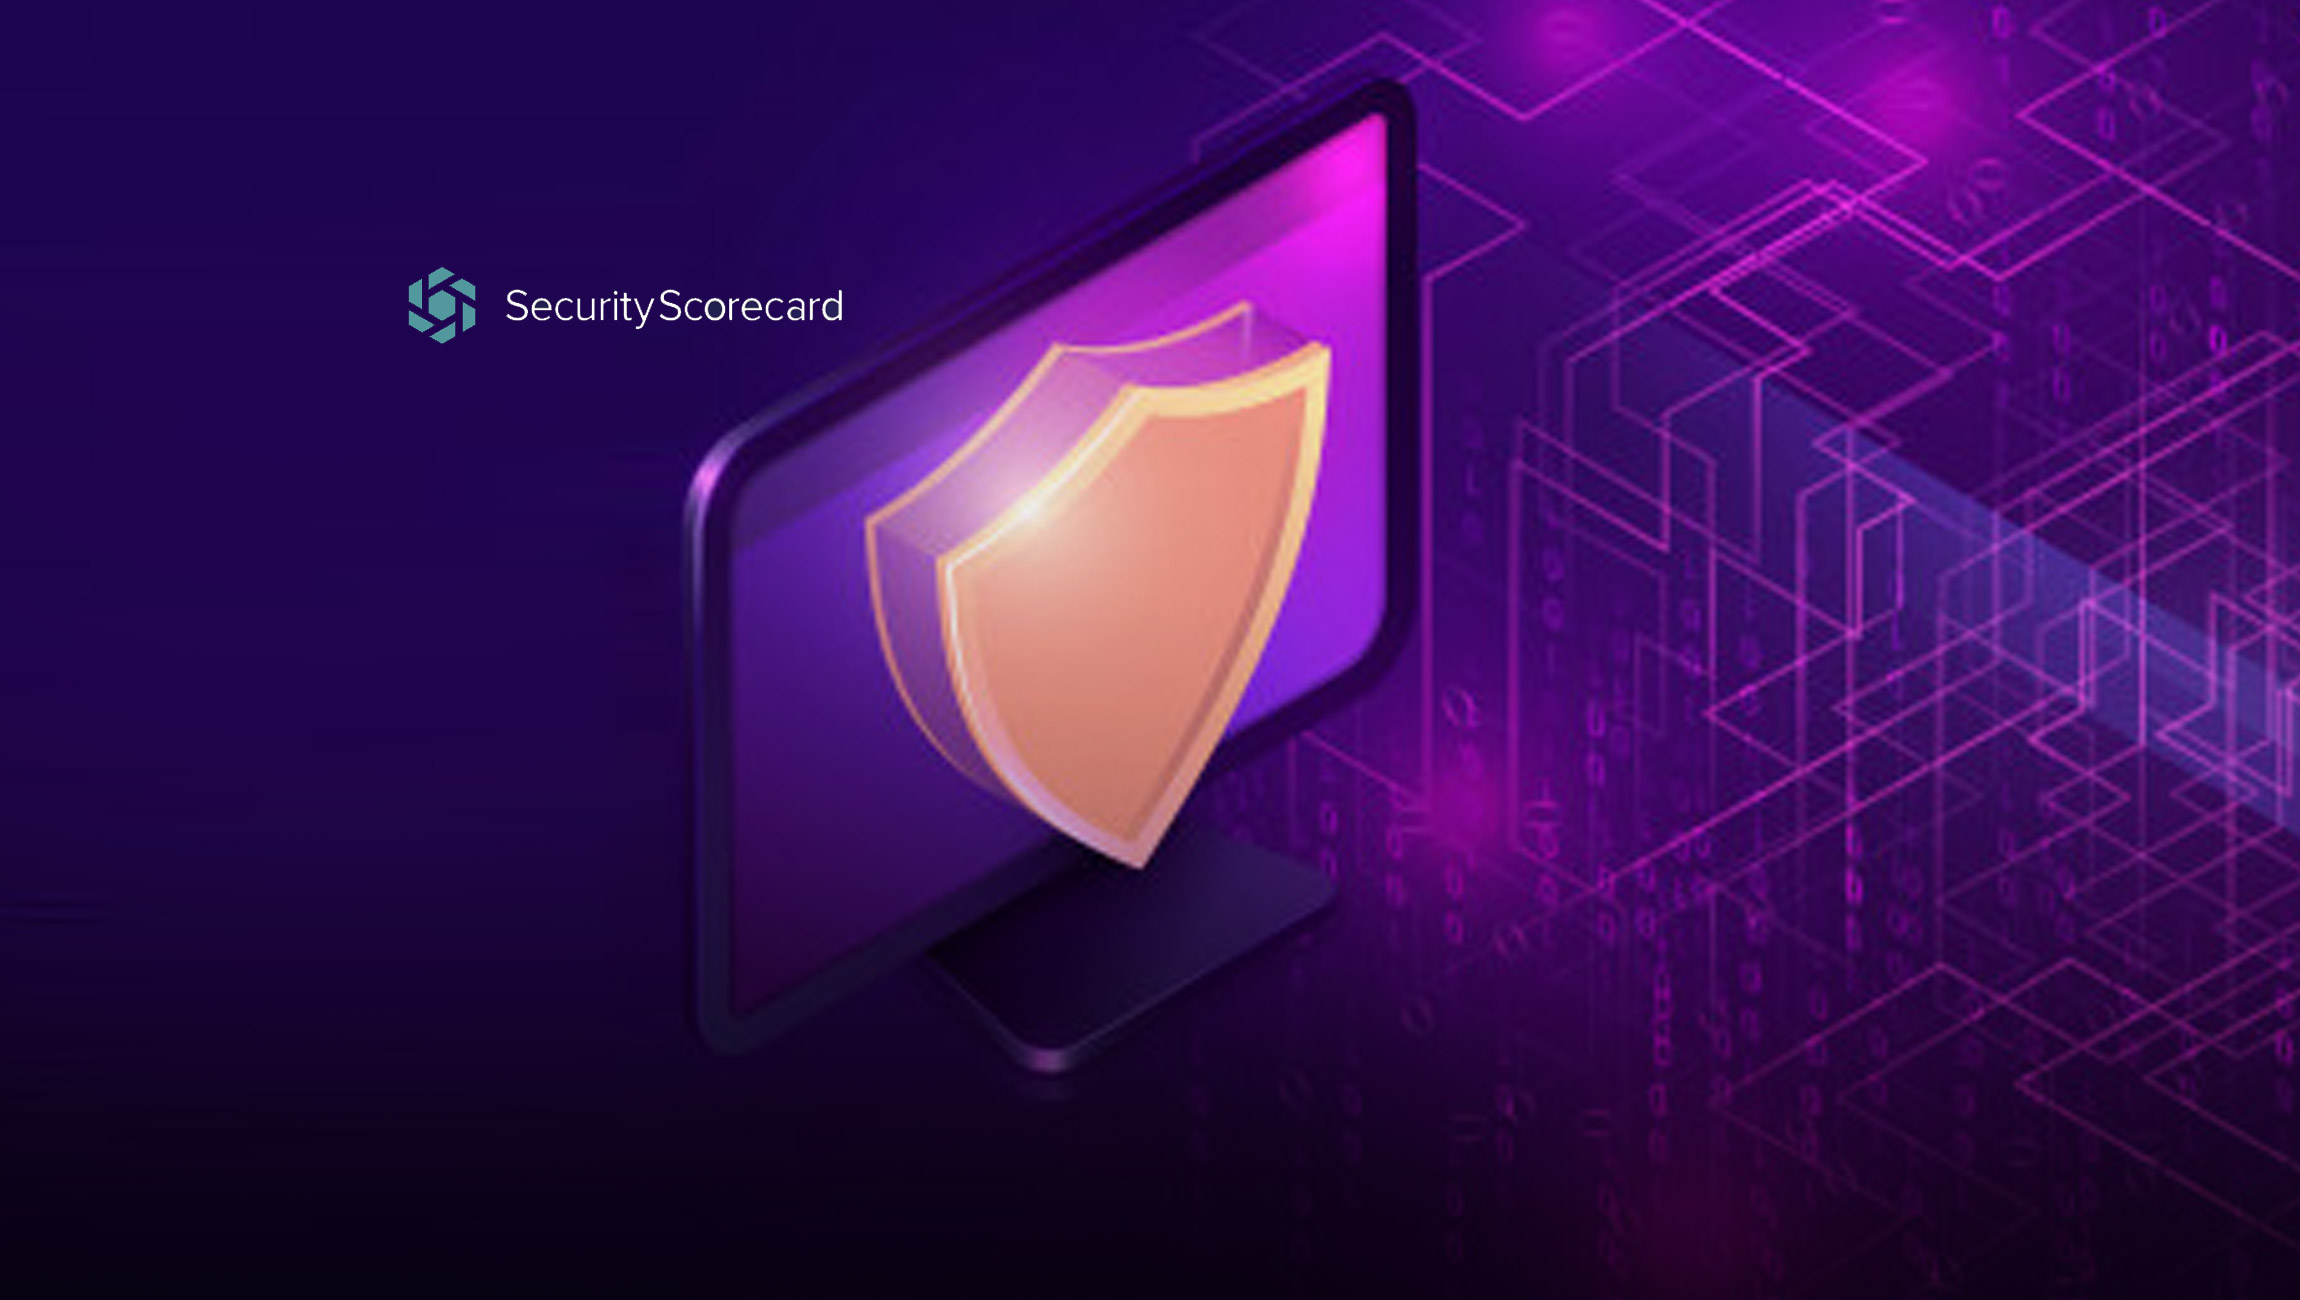 SecurityScorecard Announces Significant Momentum in 2022, Growing by 49%